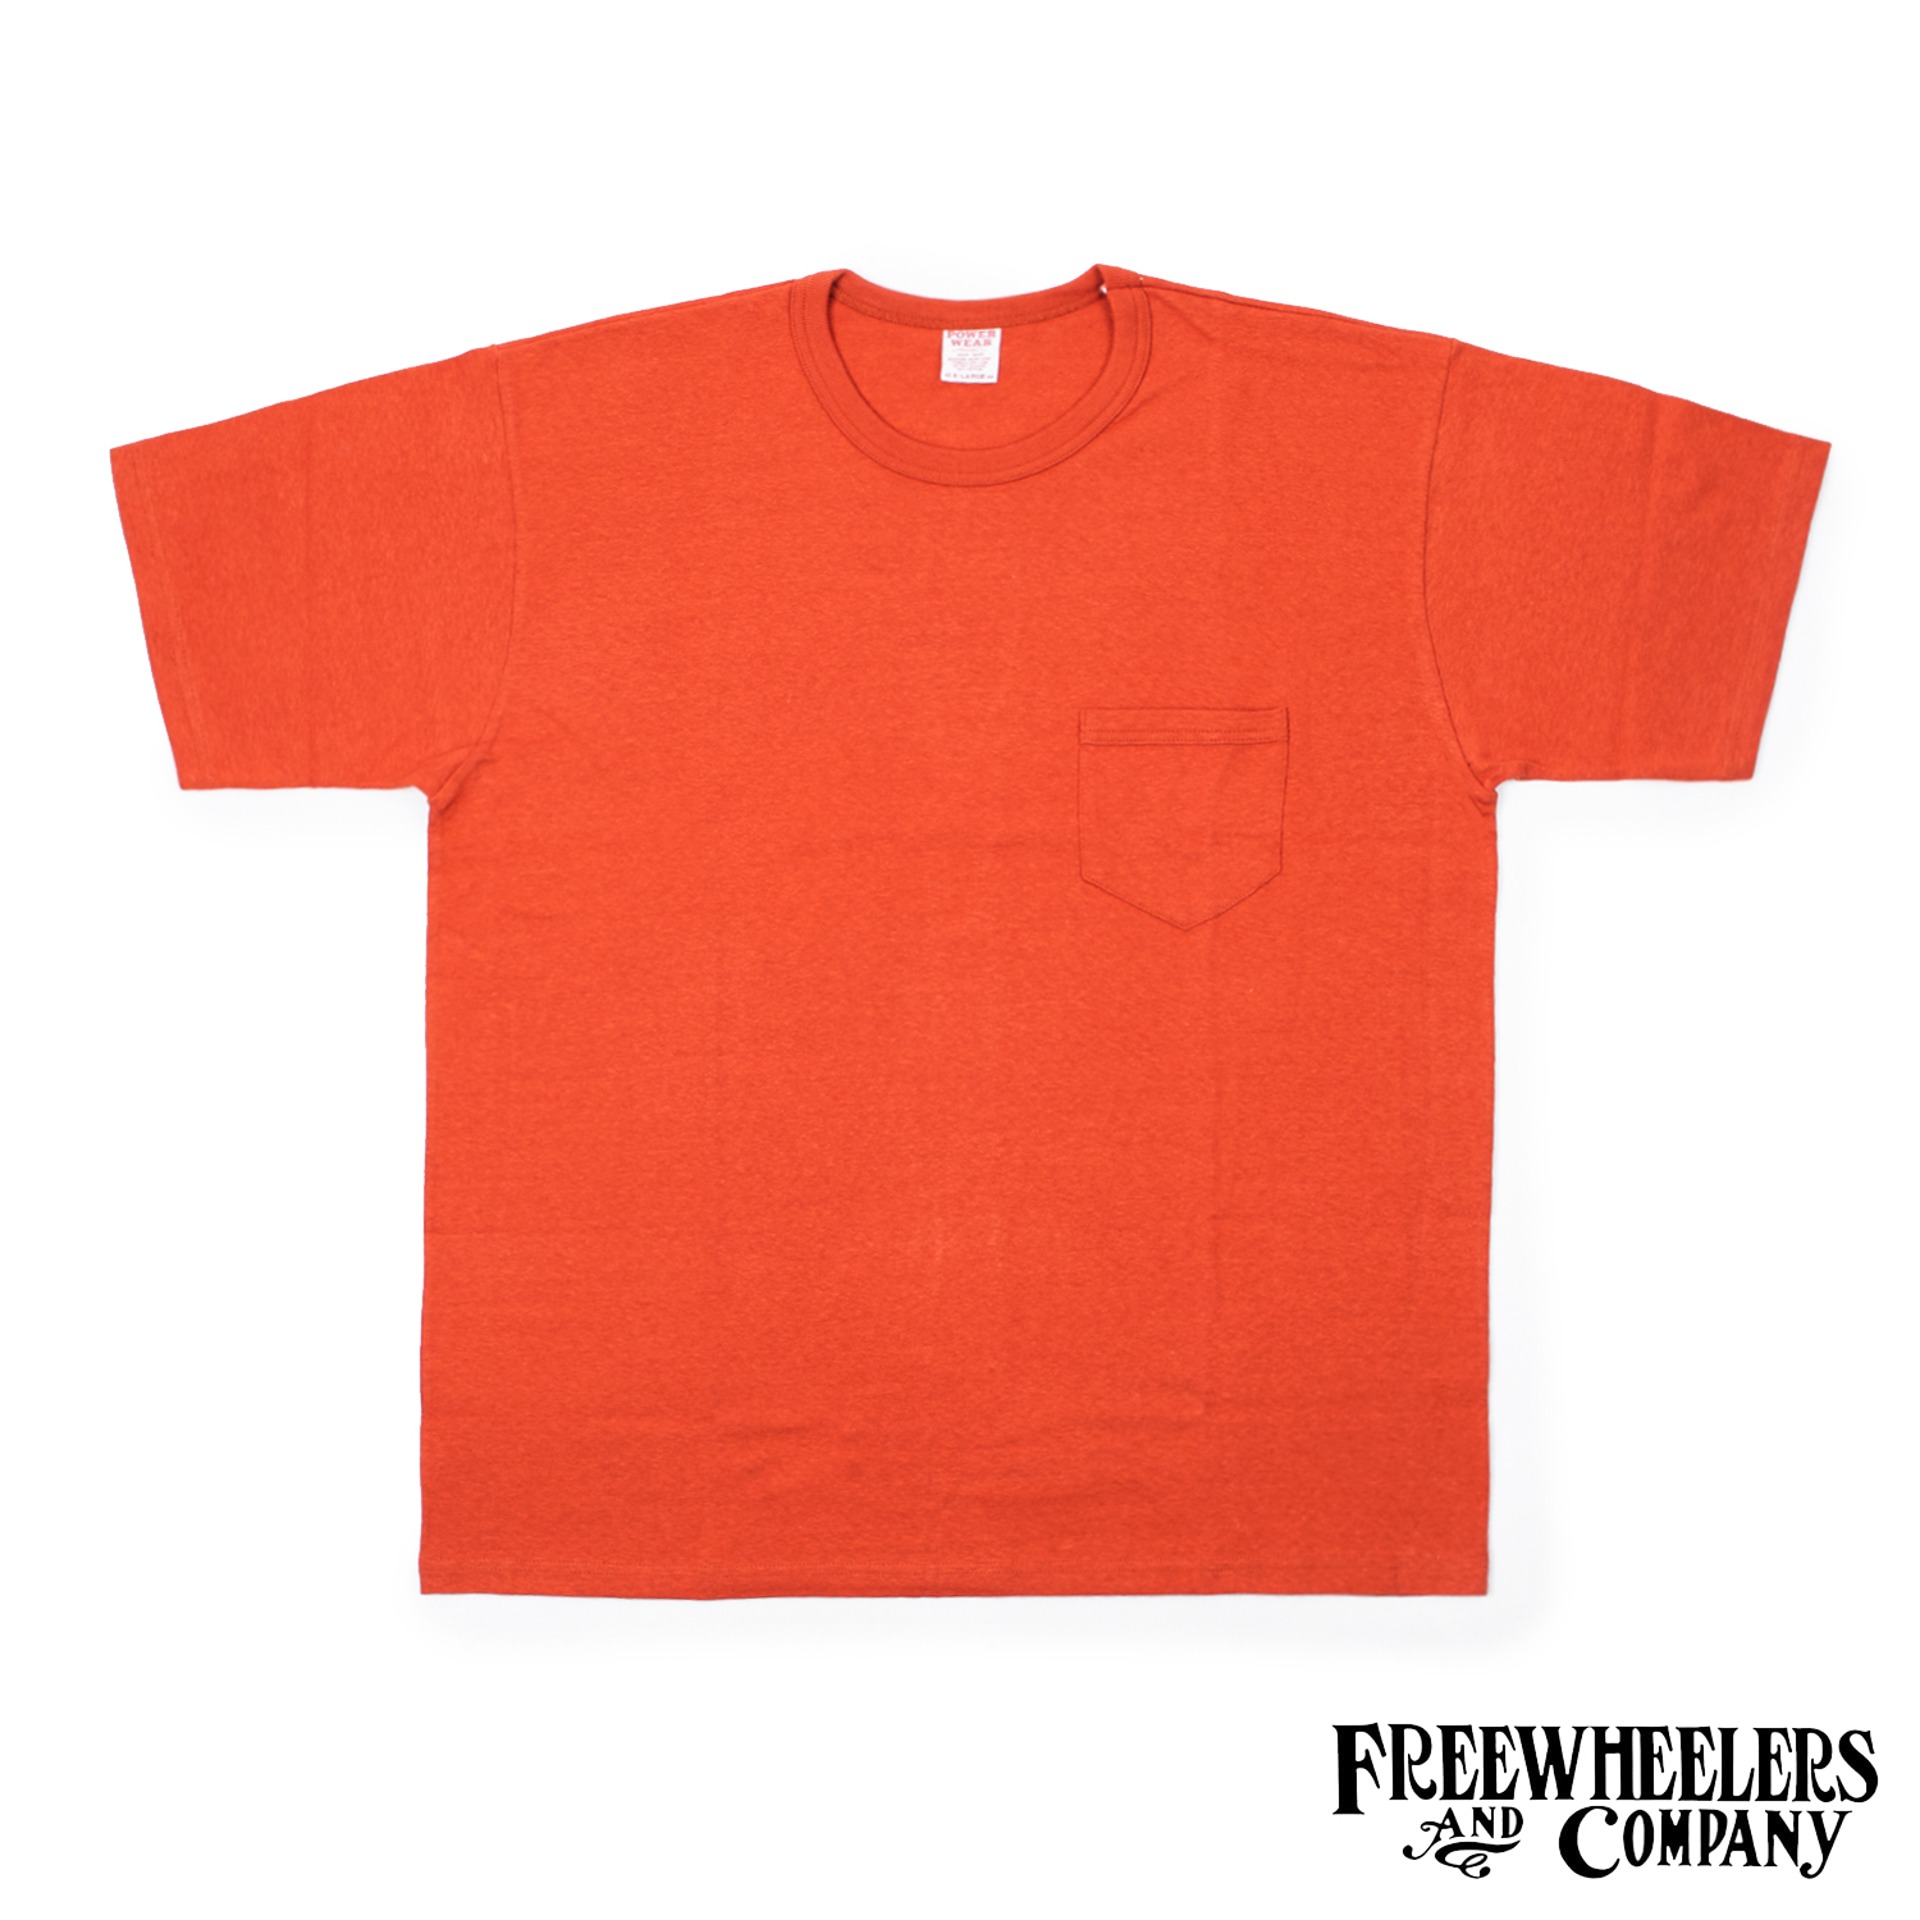 [POWER WEAR]VINTAGE STYLE MEDIUM WEIGHT JERSEY“SHORT SLEEVE POCKET T-SHIRT” (Dry Red)